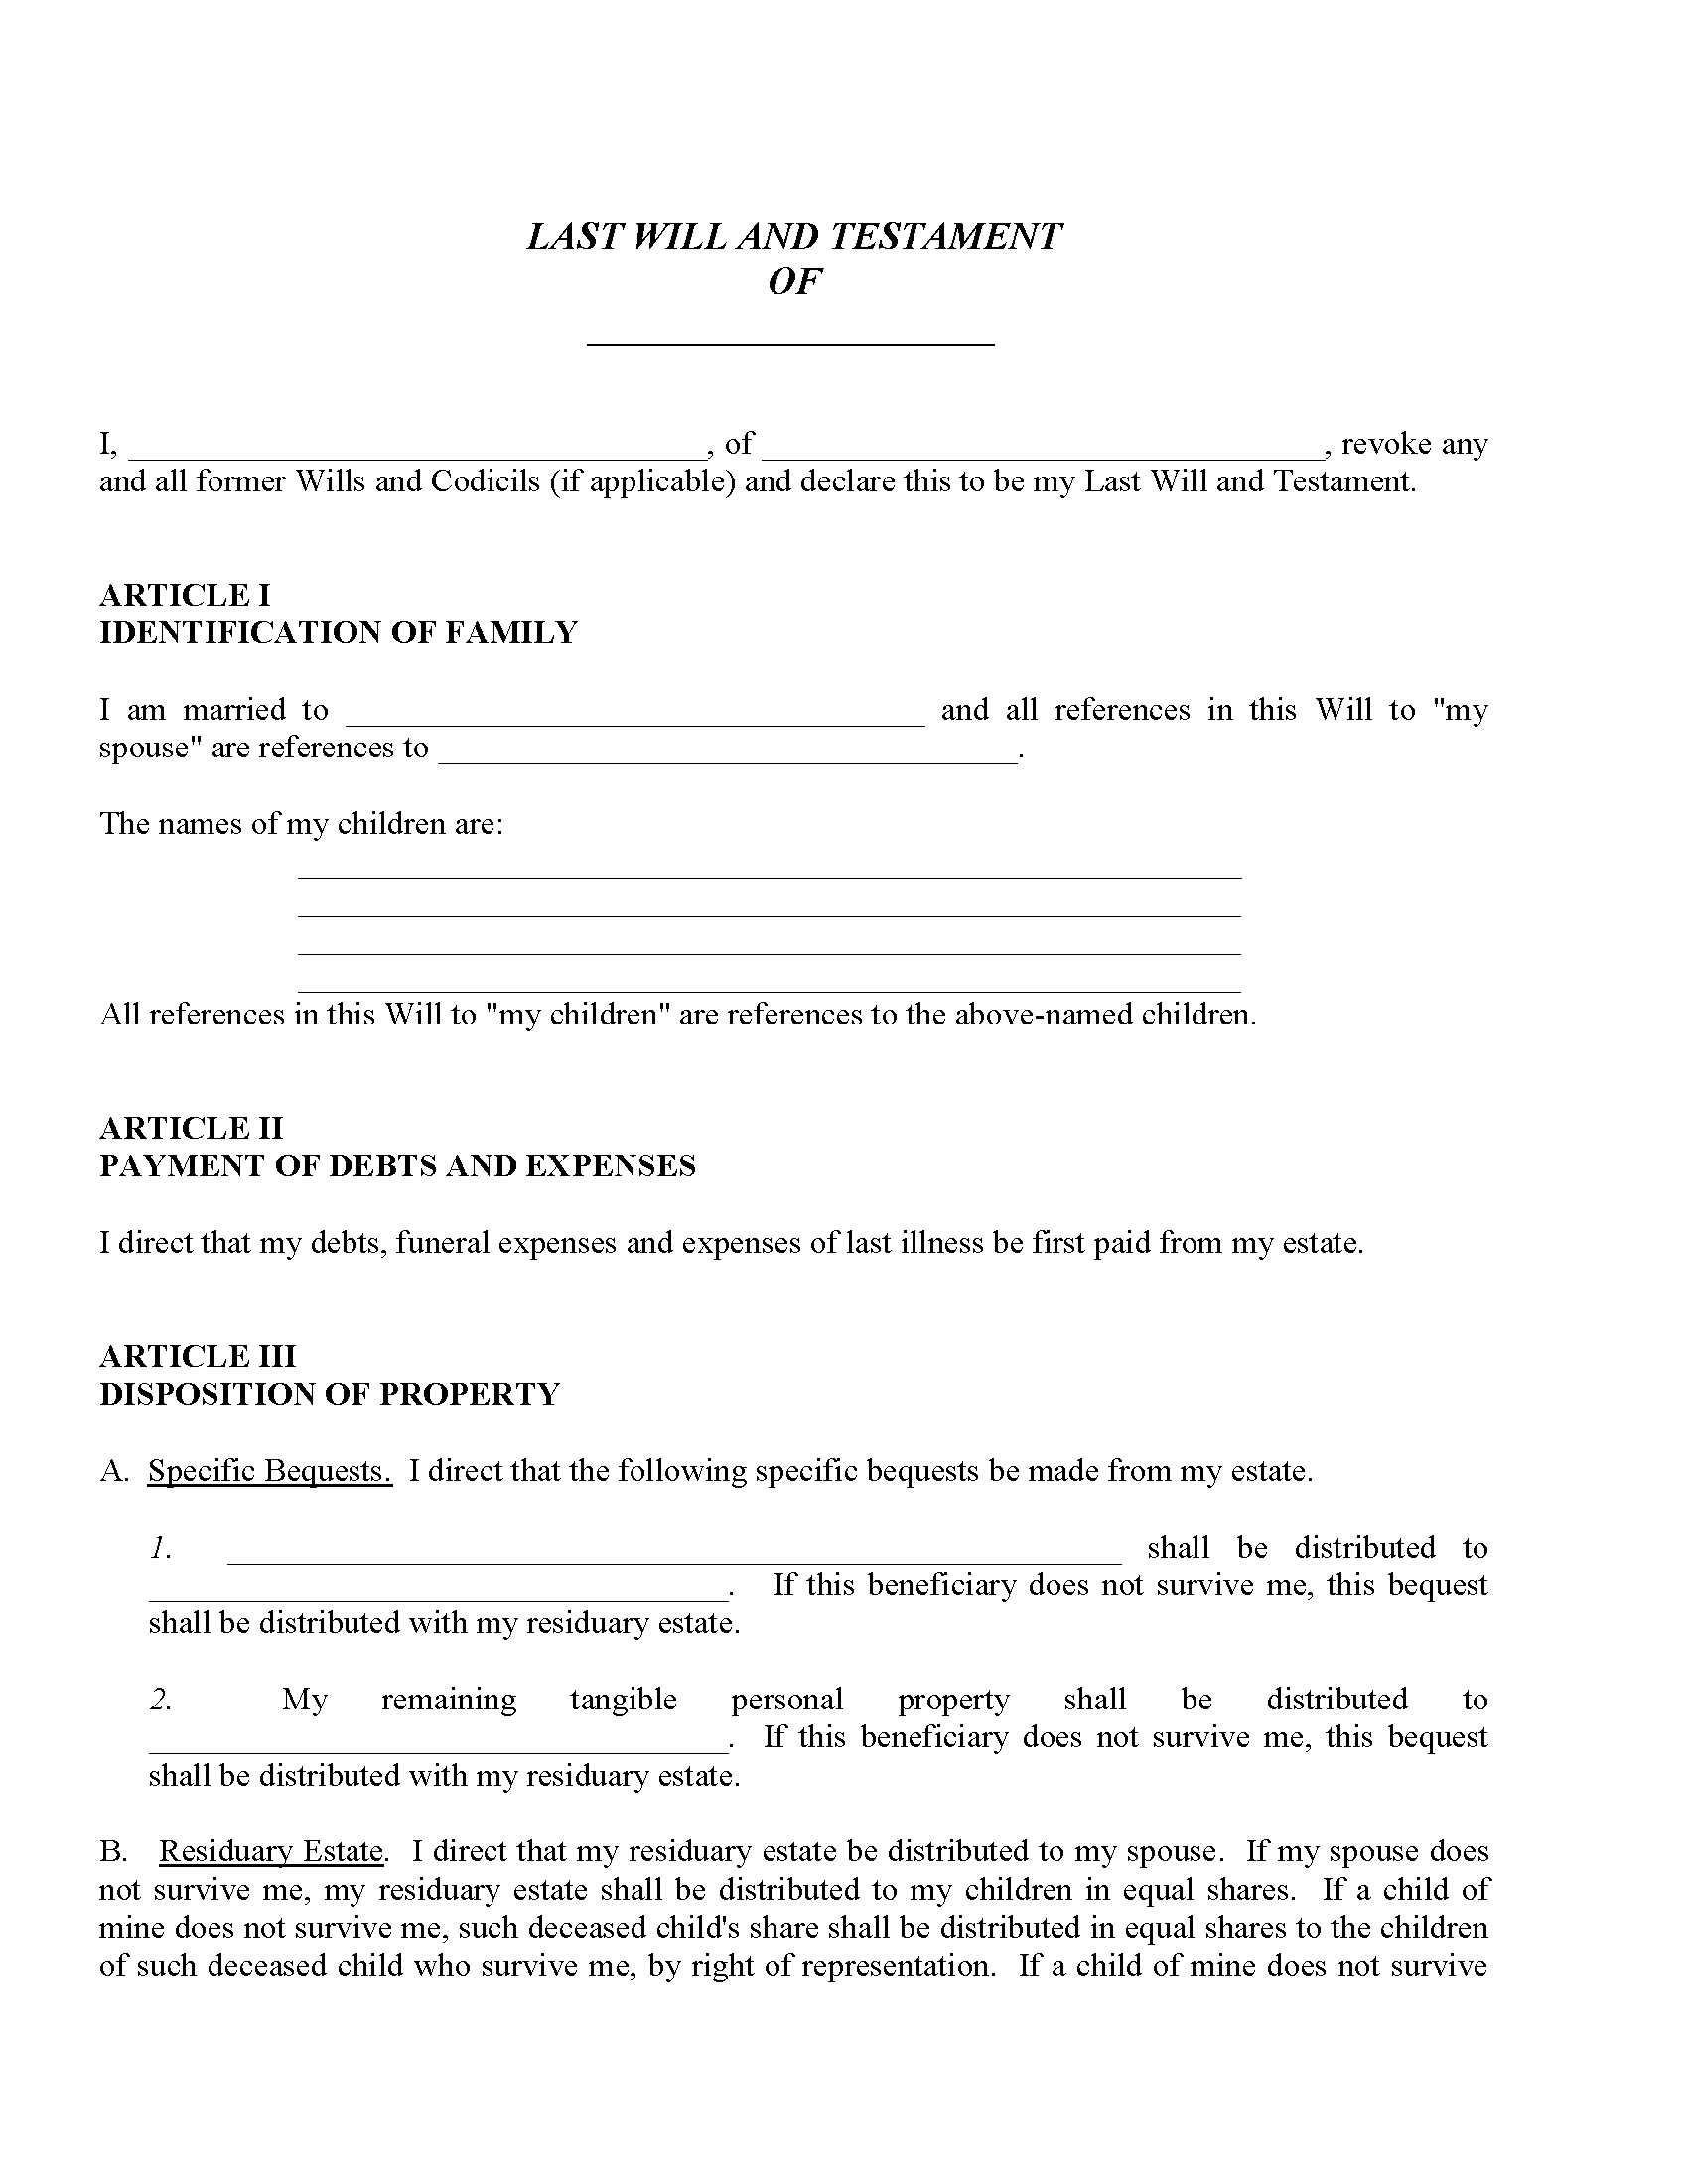 Washington Last Will and Testament Free Printable Legal Forms